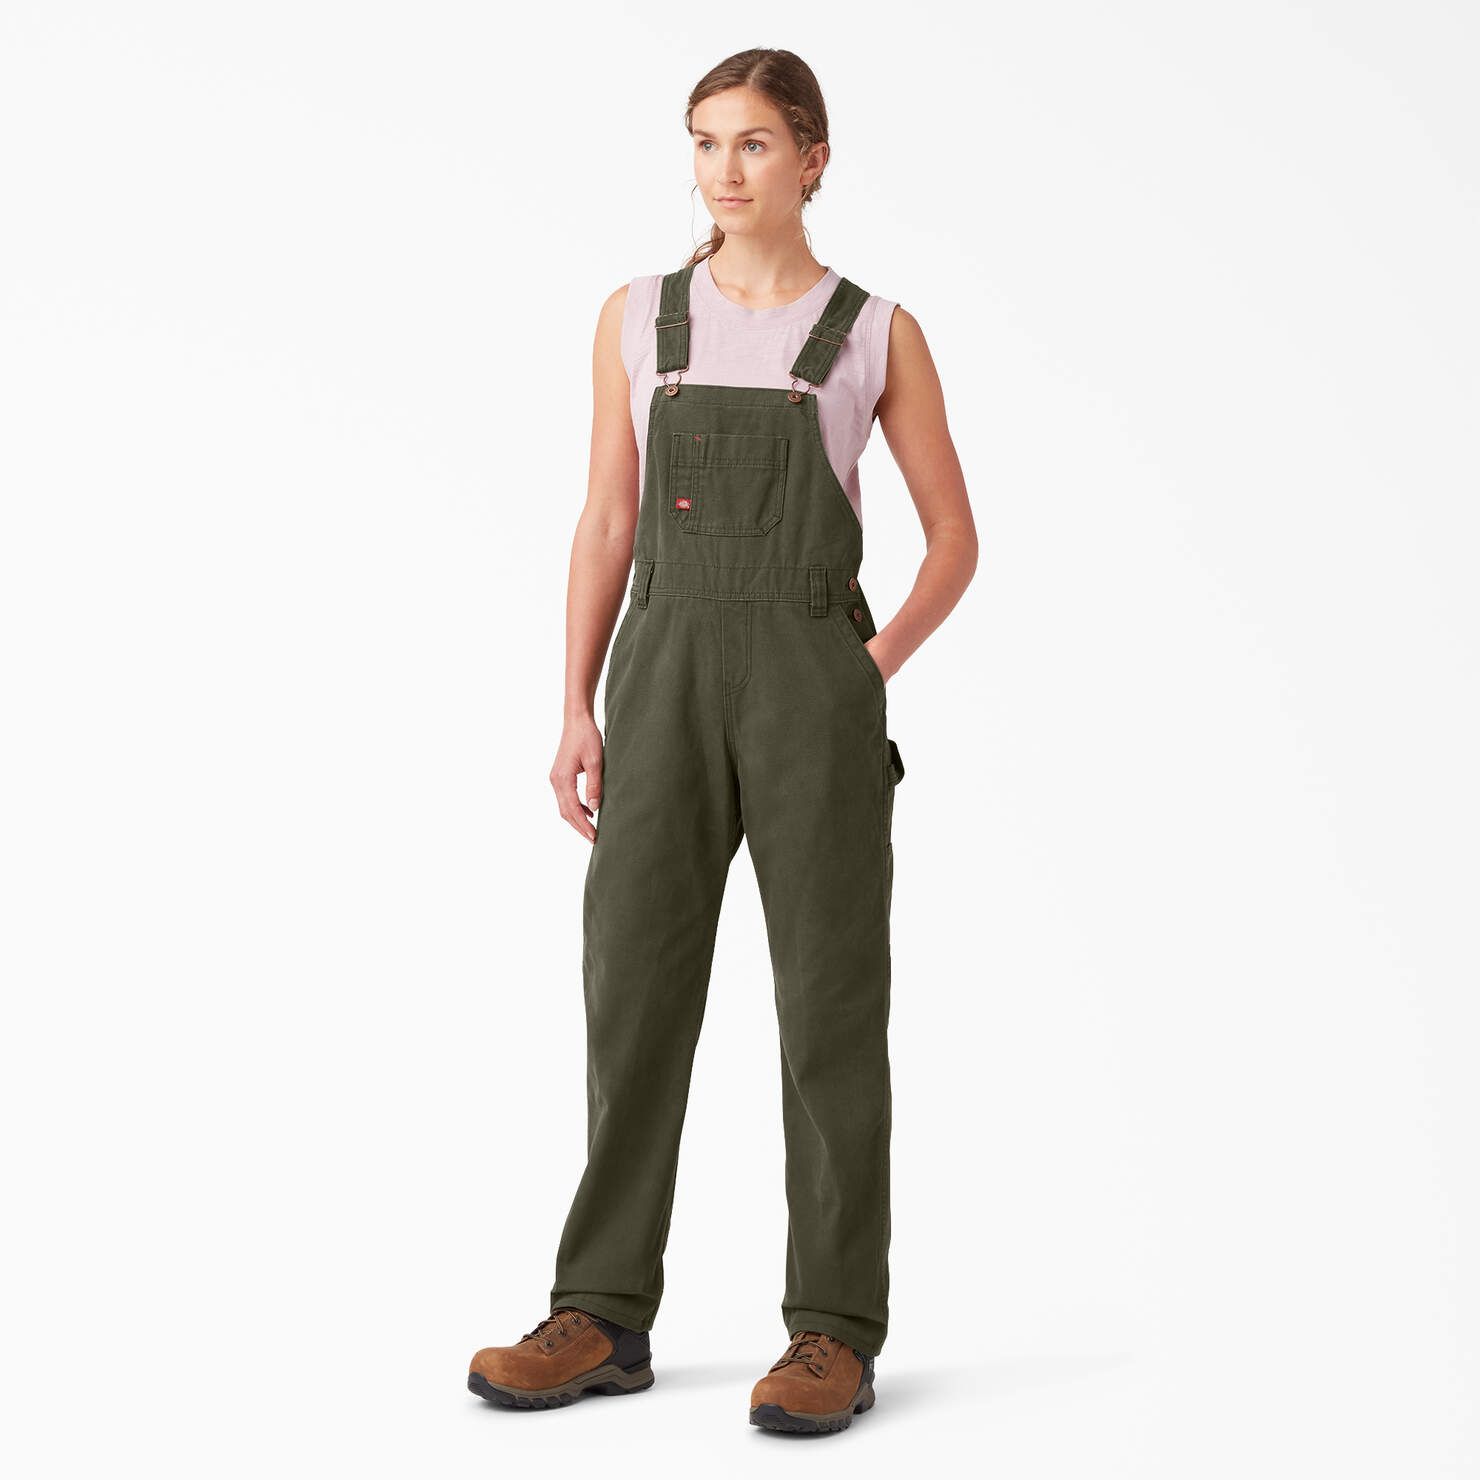 Women's Relaxed Fit Bib Overalls - Dickies US | Dickies